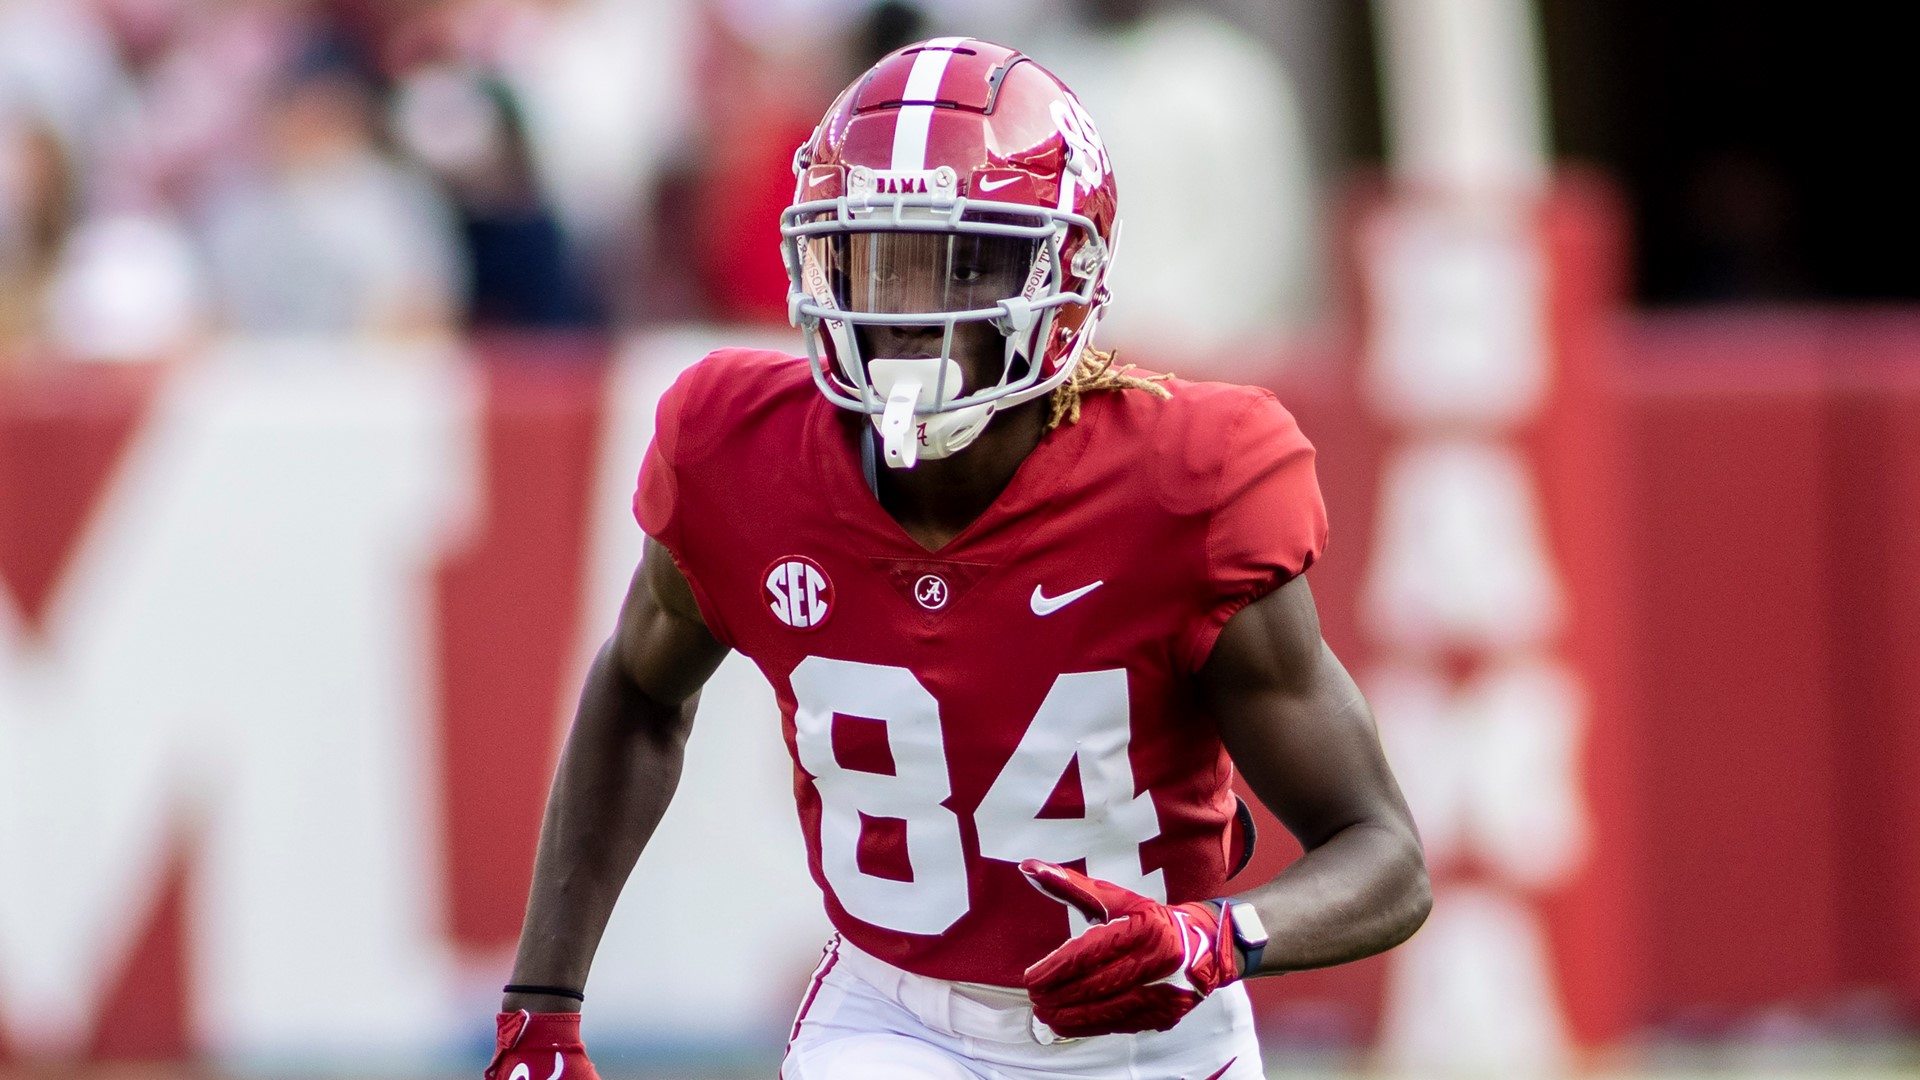 The wide receiver recently transferred from Alabama after he was suspended for an undisclosed violation of team rules.